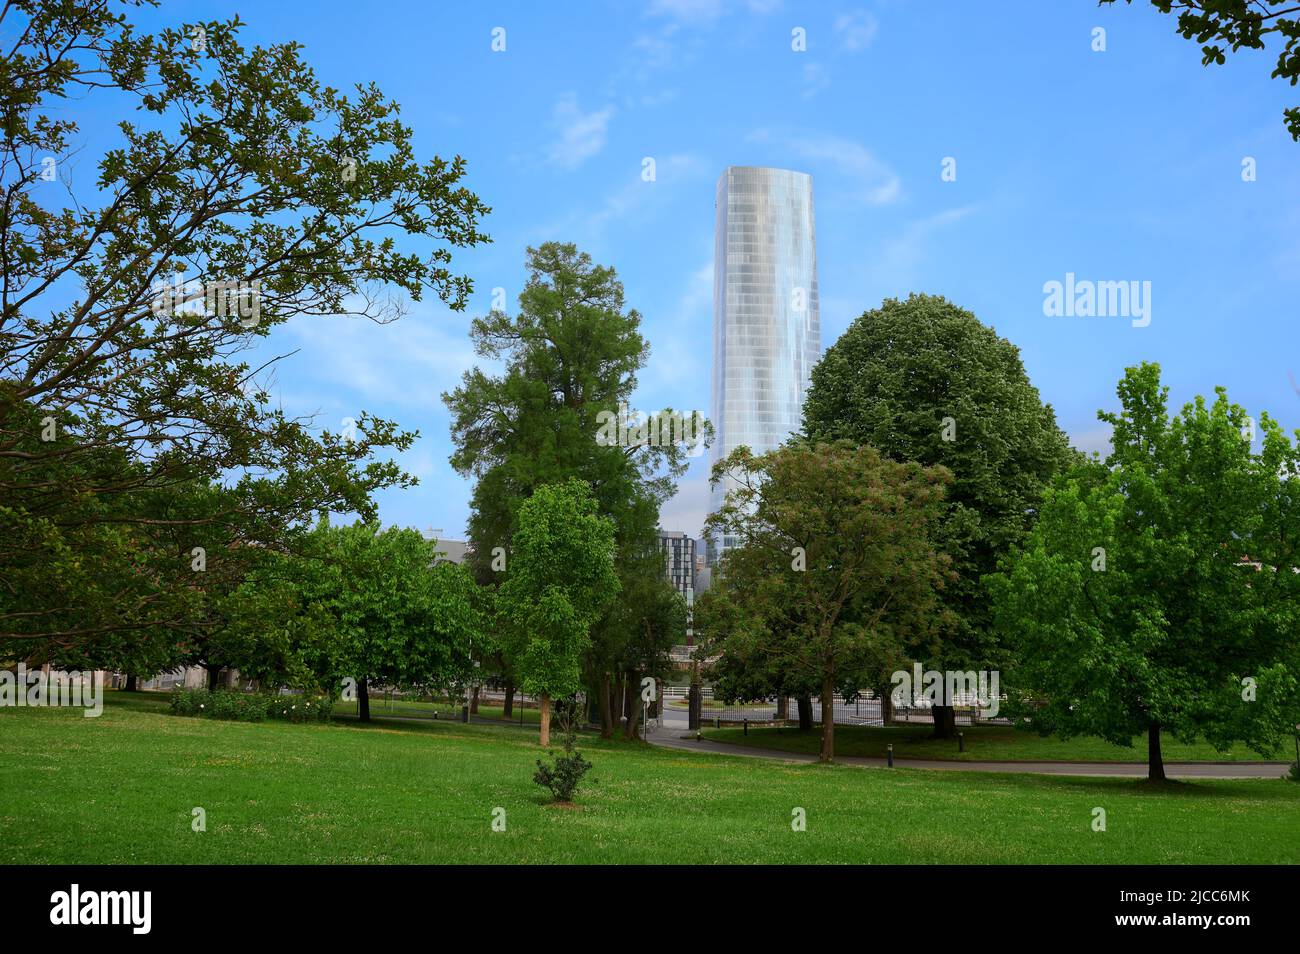 Campus of the Deusto University and Iberdrola tower at background, Bilbao, Biscay, Basque Country, Euskadi, Euskal Herria, Spain, Europe Stock Photo